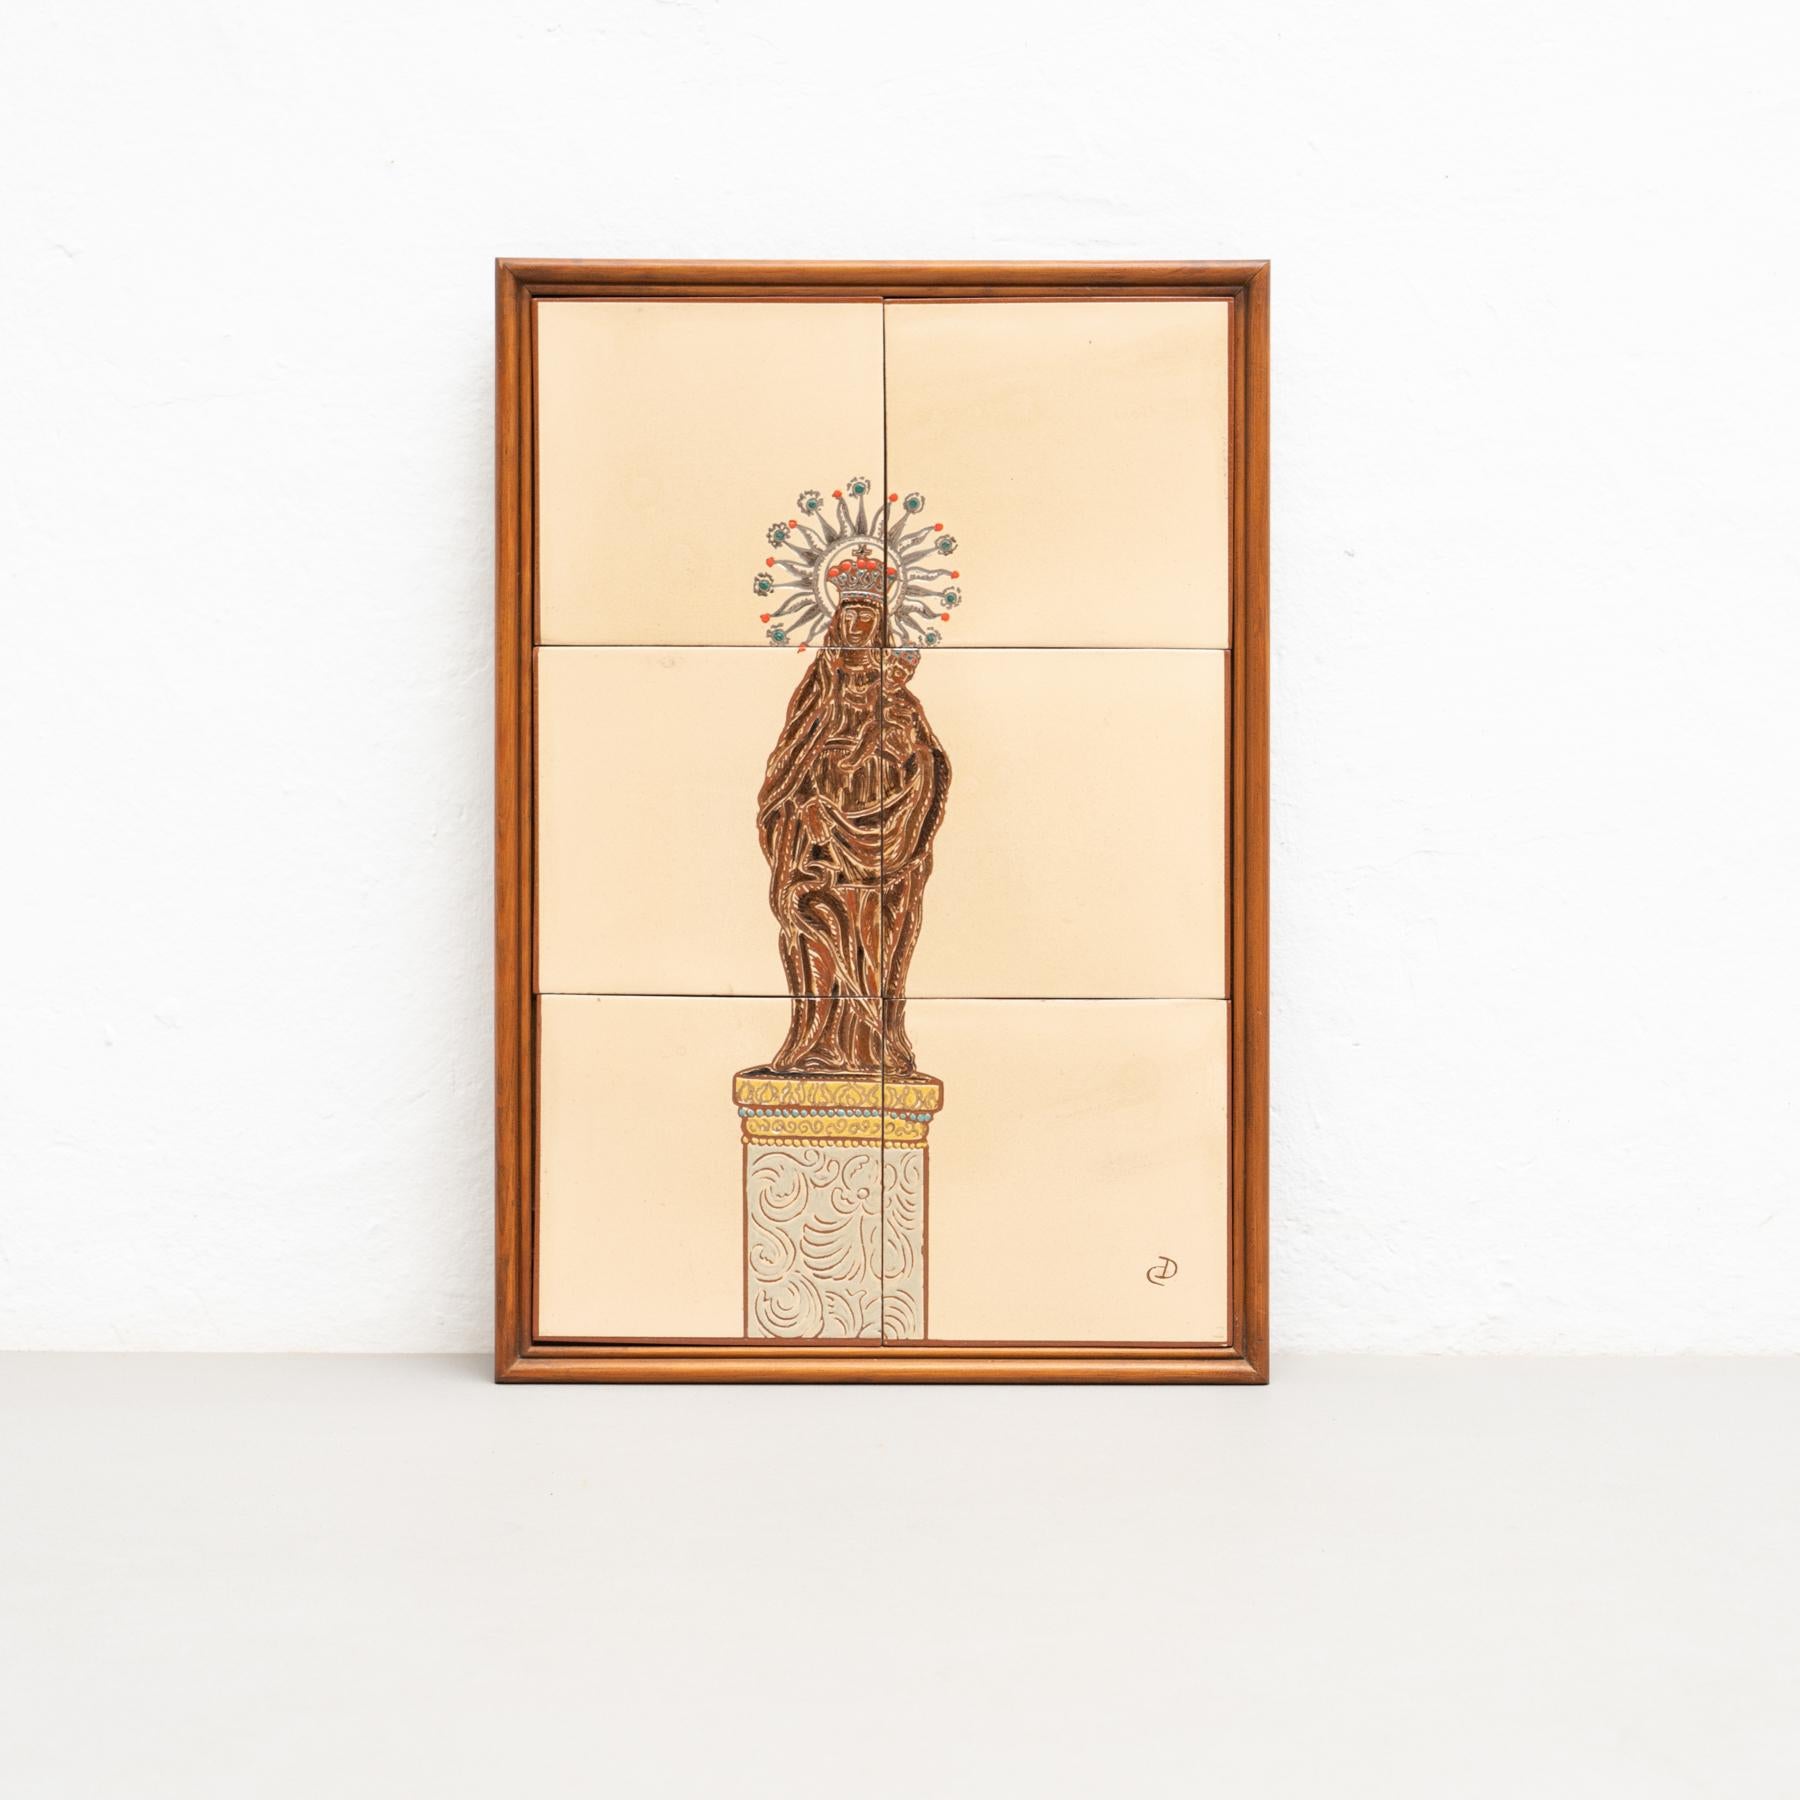 Ceramic hand painted artwork of virgin 'Nuestra Señora del Pilar' by Catalan artist Diaz Costa, circa 1960.
Framed. Signed.

In original condition, with minor wear consistent of age and use, preserving a beautiul patina.